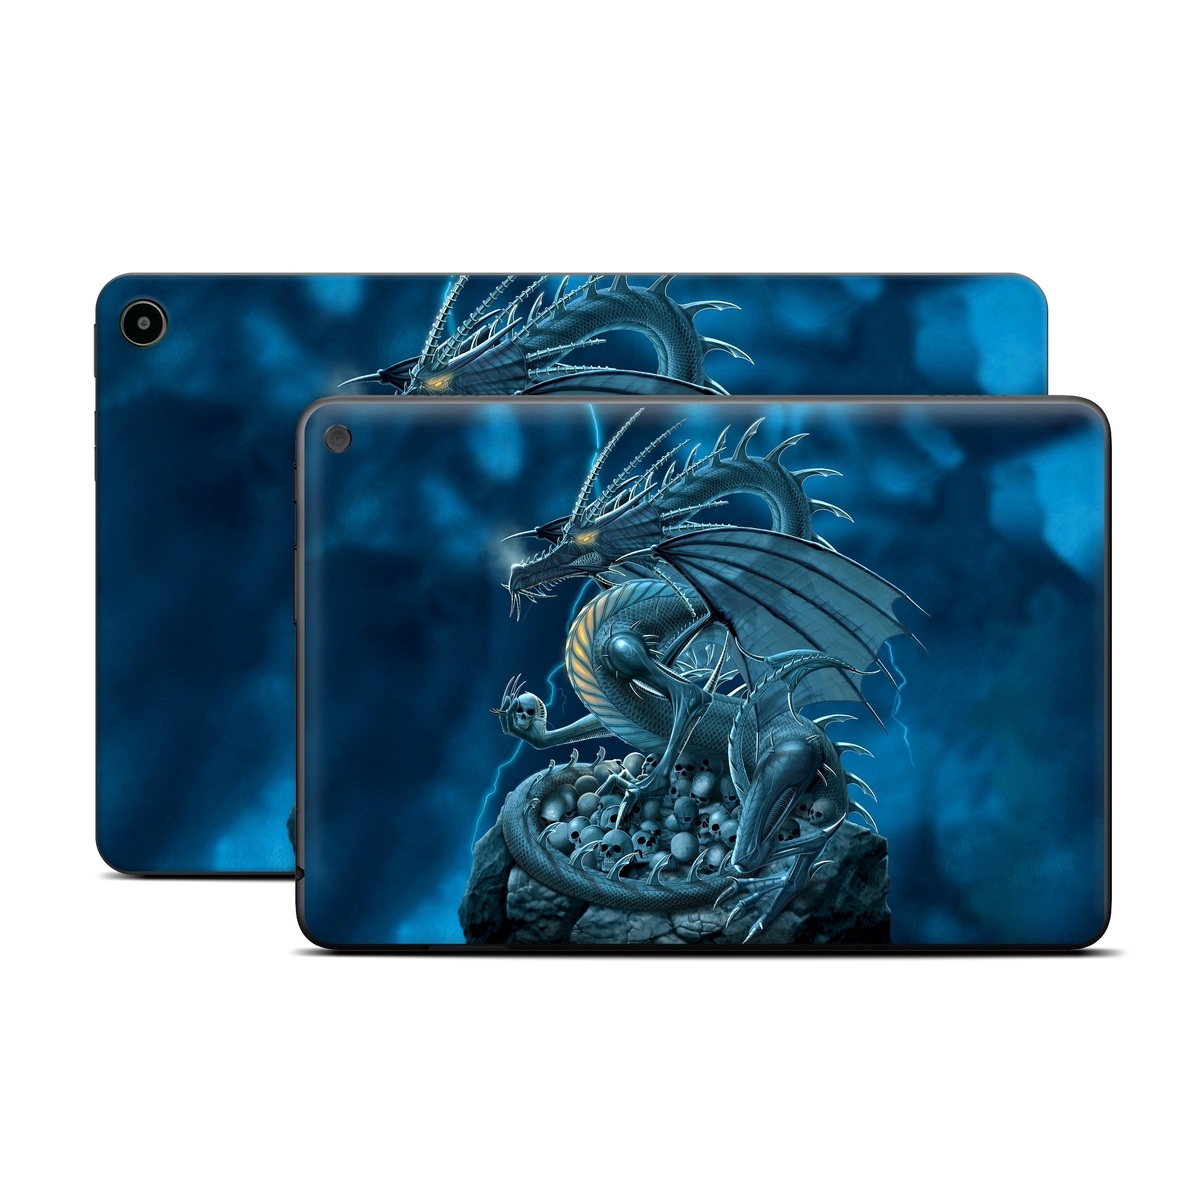 Amazon Fire Tablet Series Skin Skin design of Cg artwork, Dragon, Mythology, Fictional character, Illustration, Mythical creature, Art, Demon, with blue, yellow colors